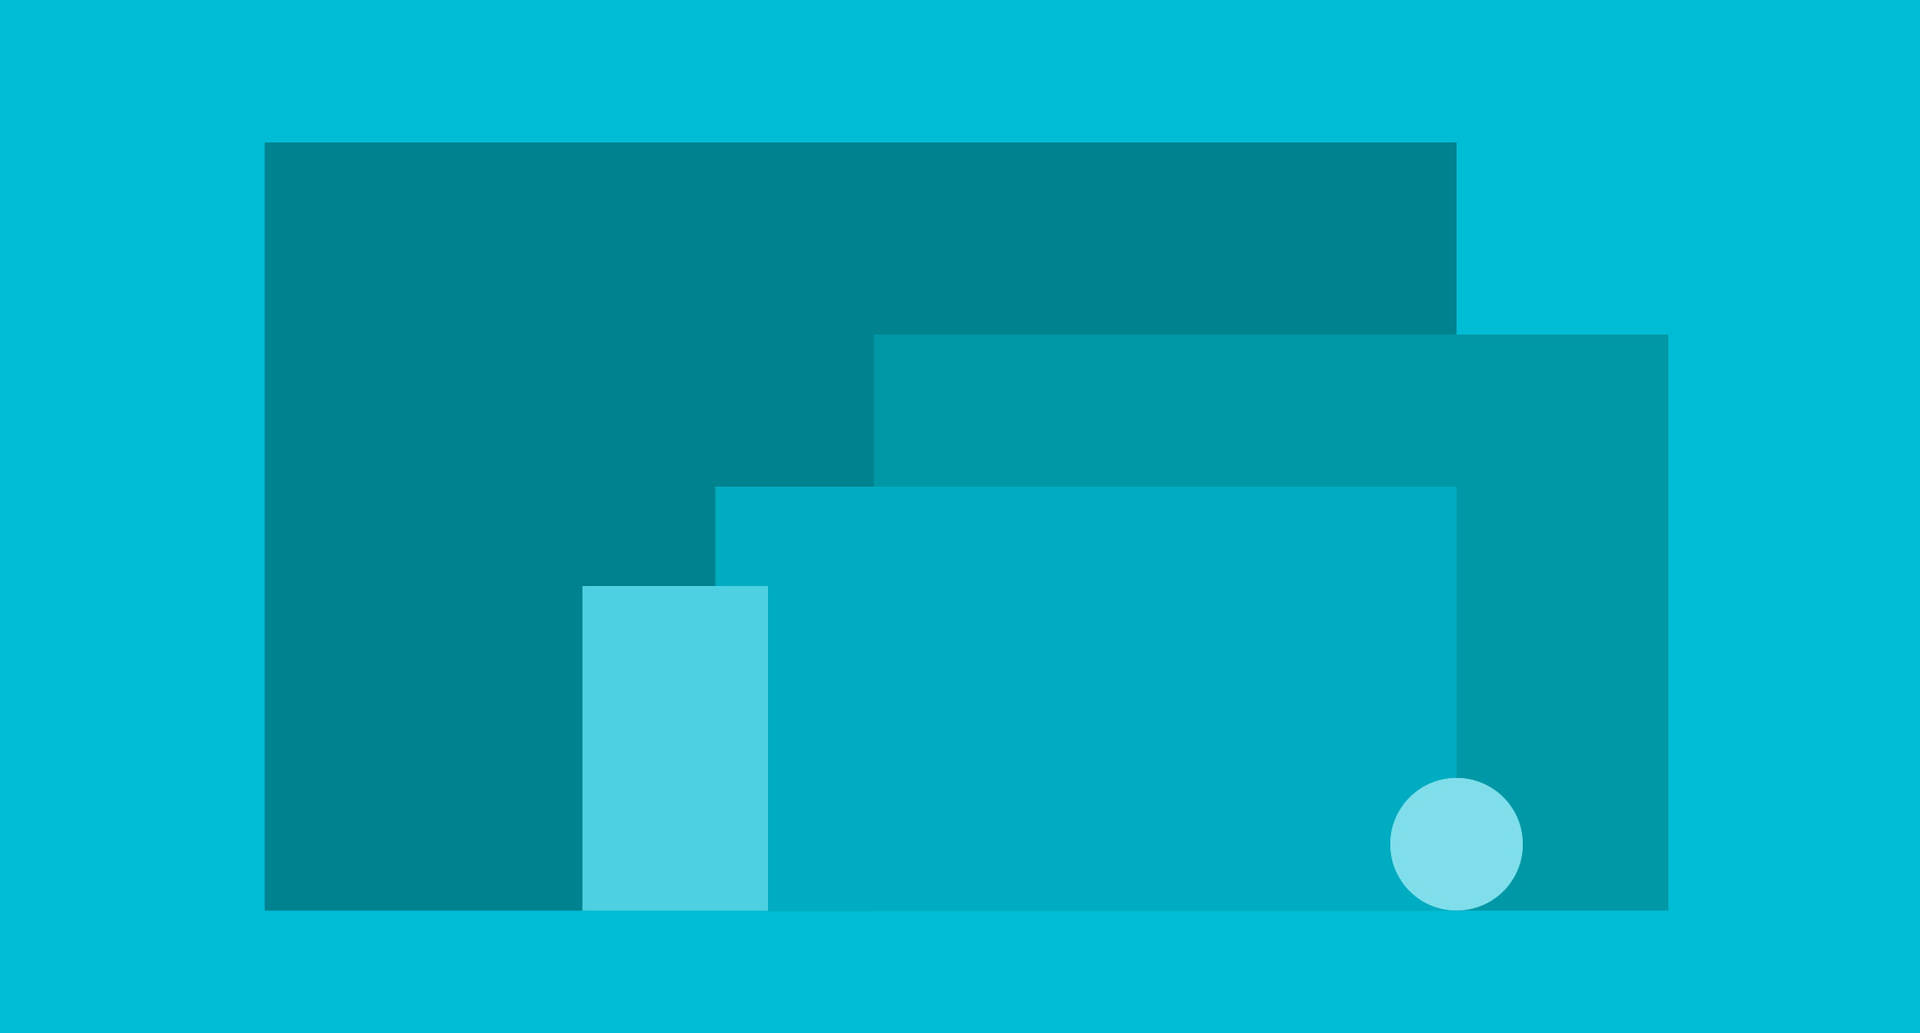 Blue Rectangles Material Design Picture